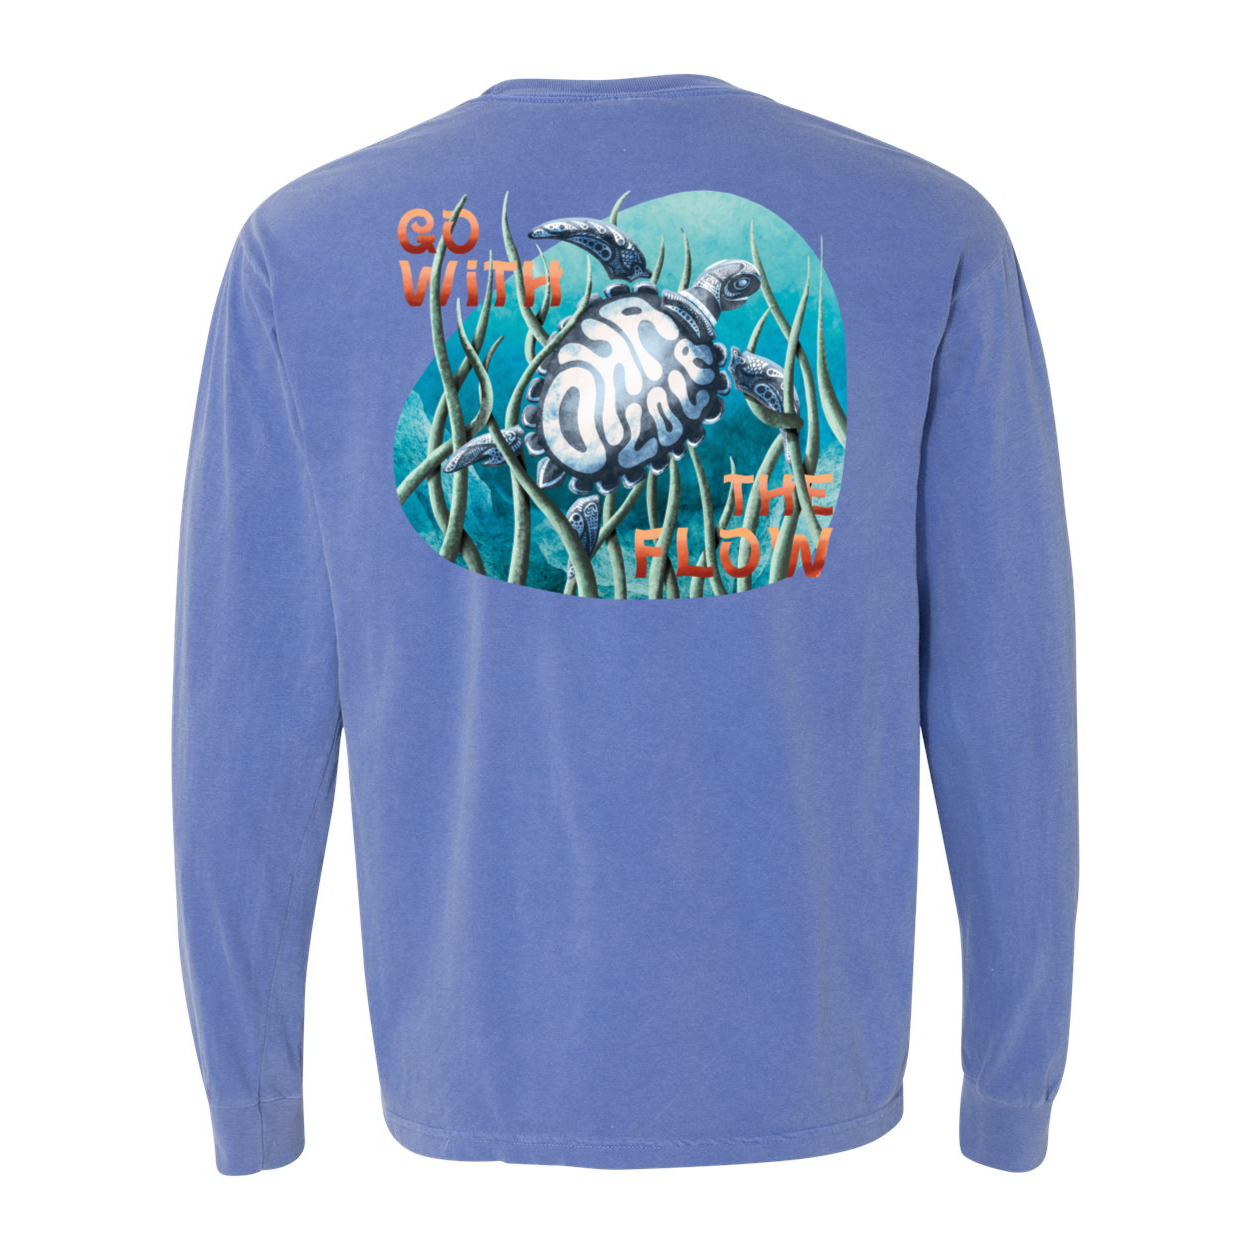 Go with the Flow (Long Sleeve)